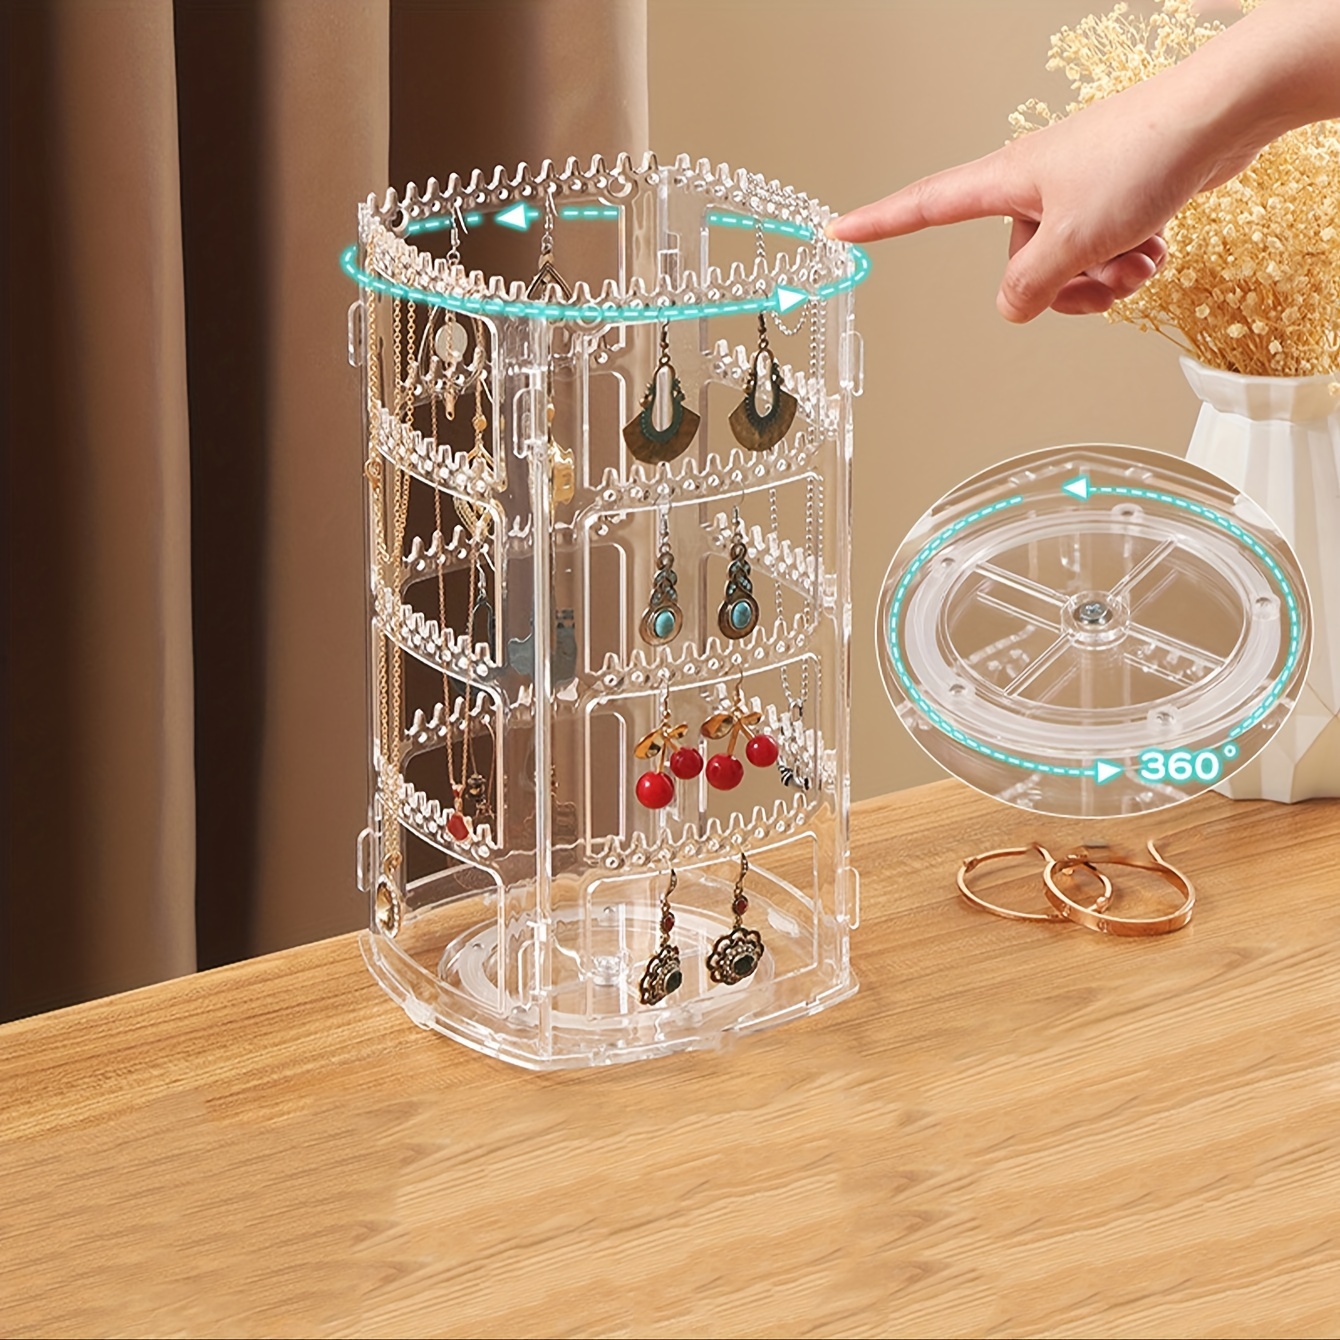 1pc Acrylic Jewelry Boxes For Women Hanging Jewelry Organizer Holder With 2  Drawers For Earring Bangle Bracelet Necklace Ring Display Case, Aesthetic